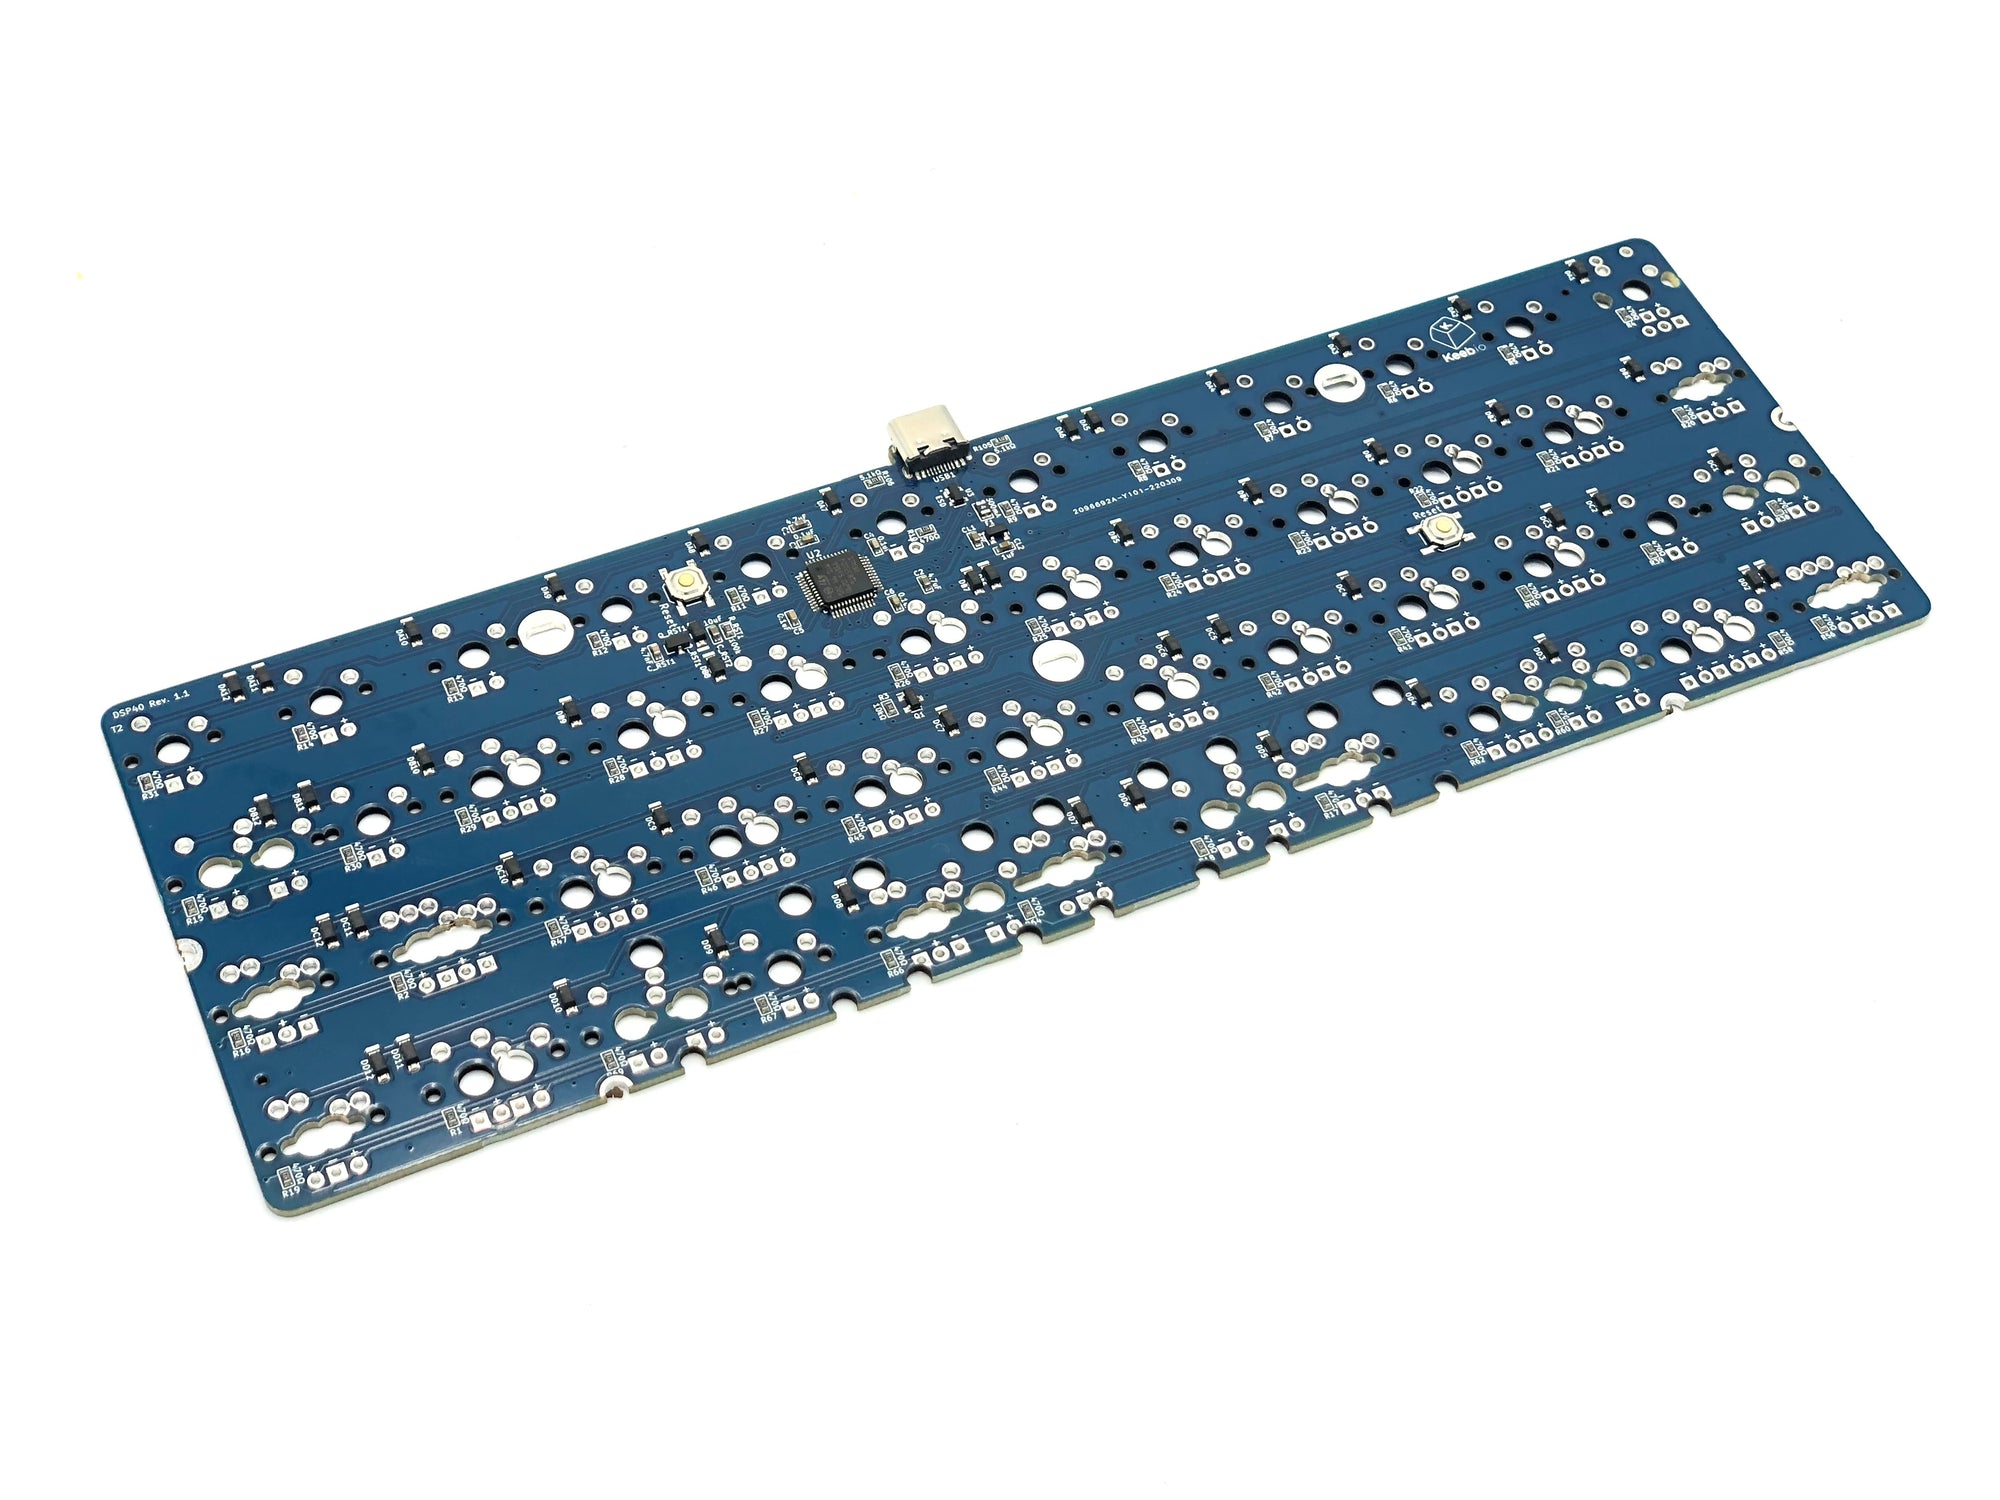 DSP40 PCB - 40% Staggered or Ortholinear Keyboard